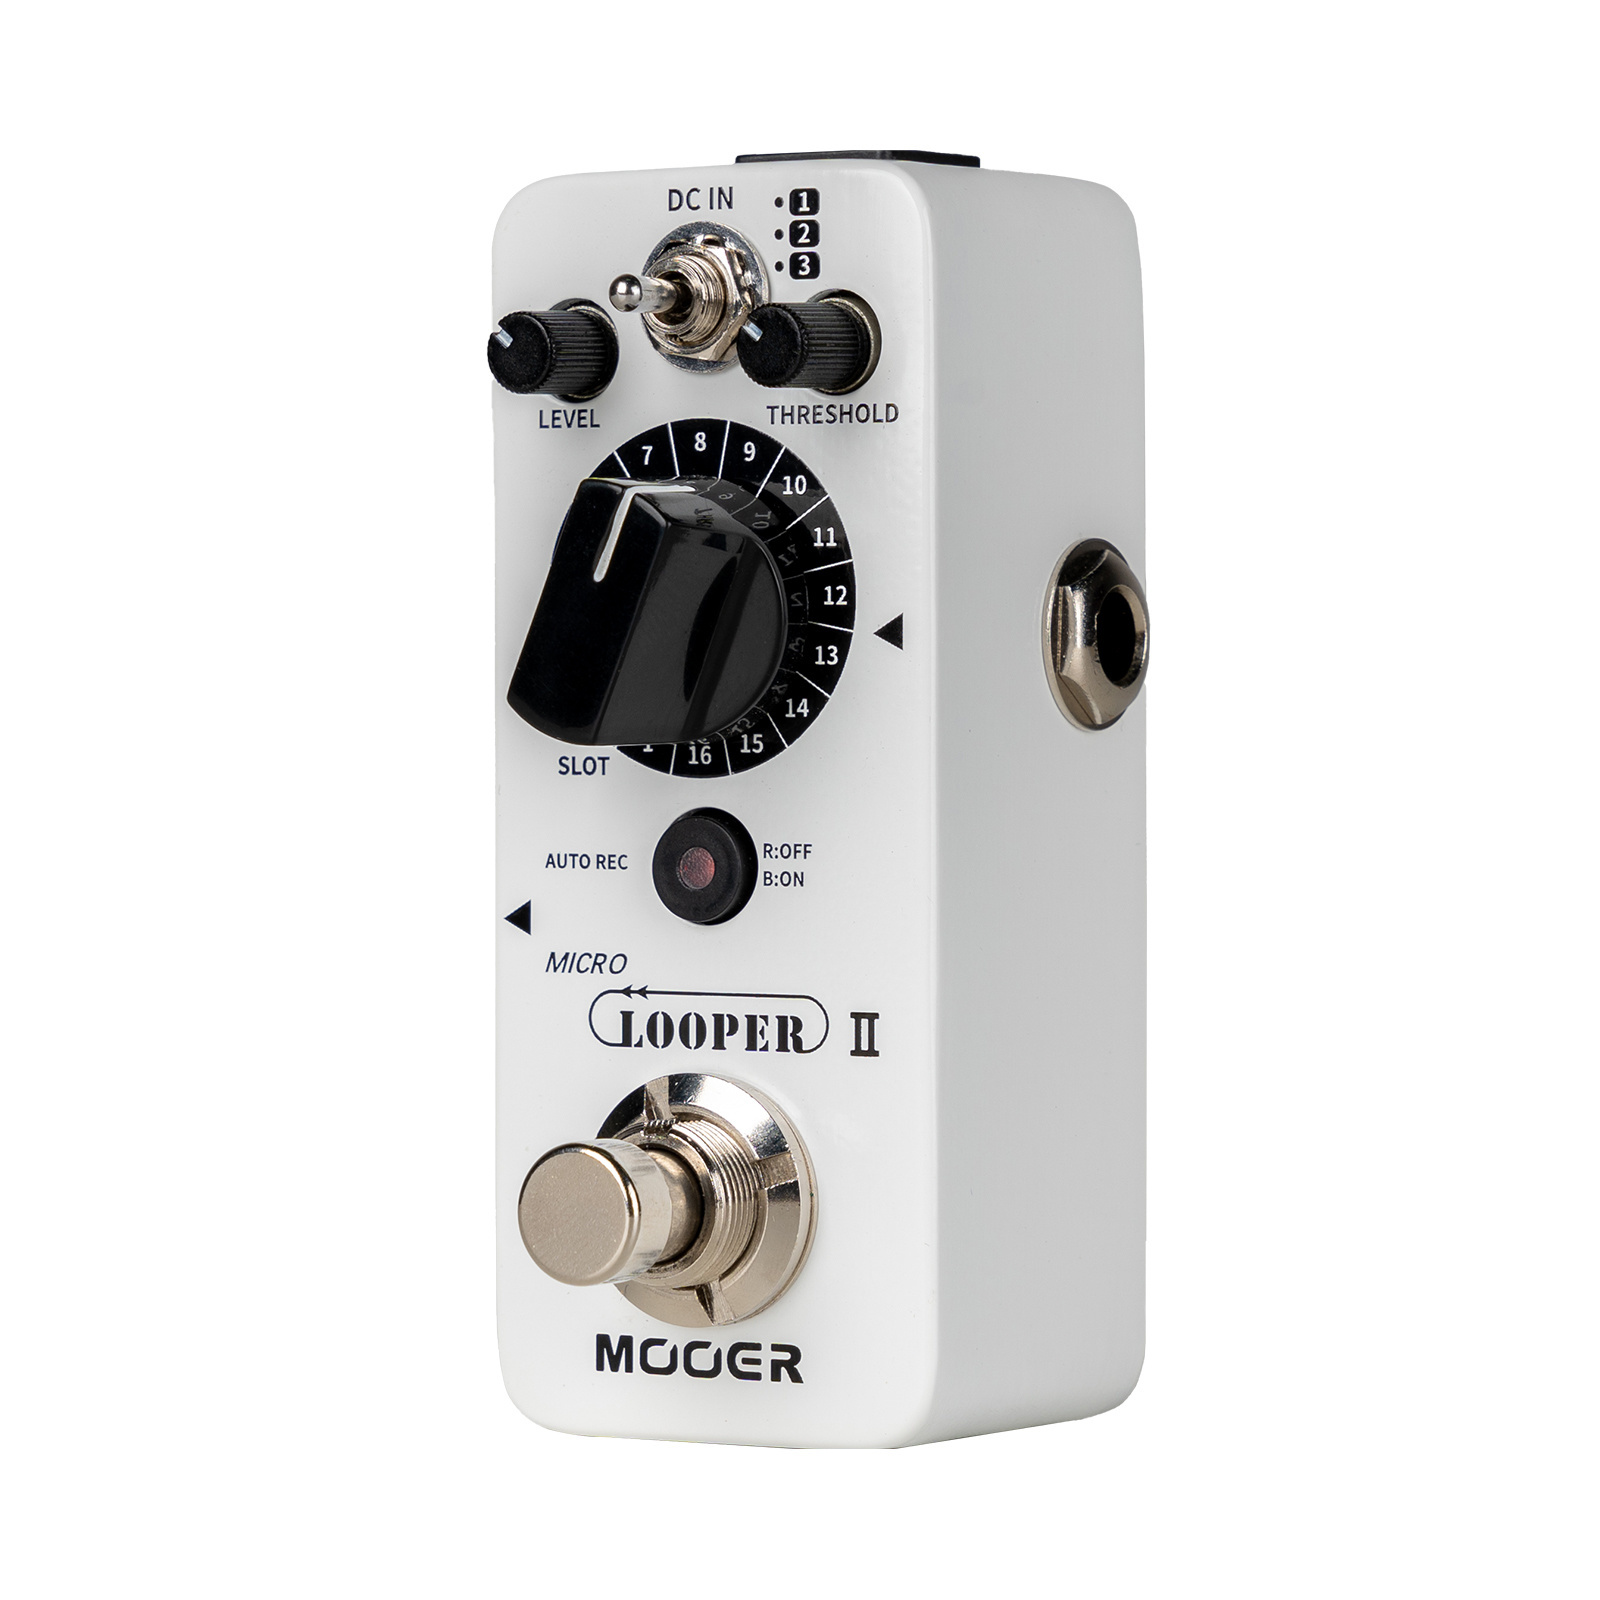 Products->PEDAL->Micro Series->Looper/Drummer